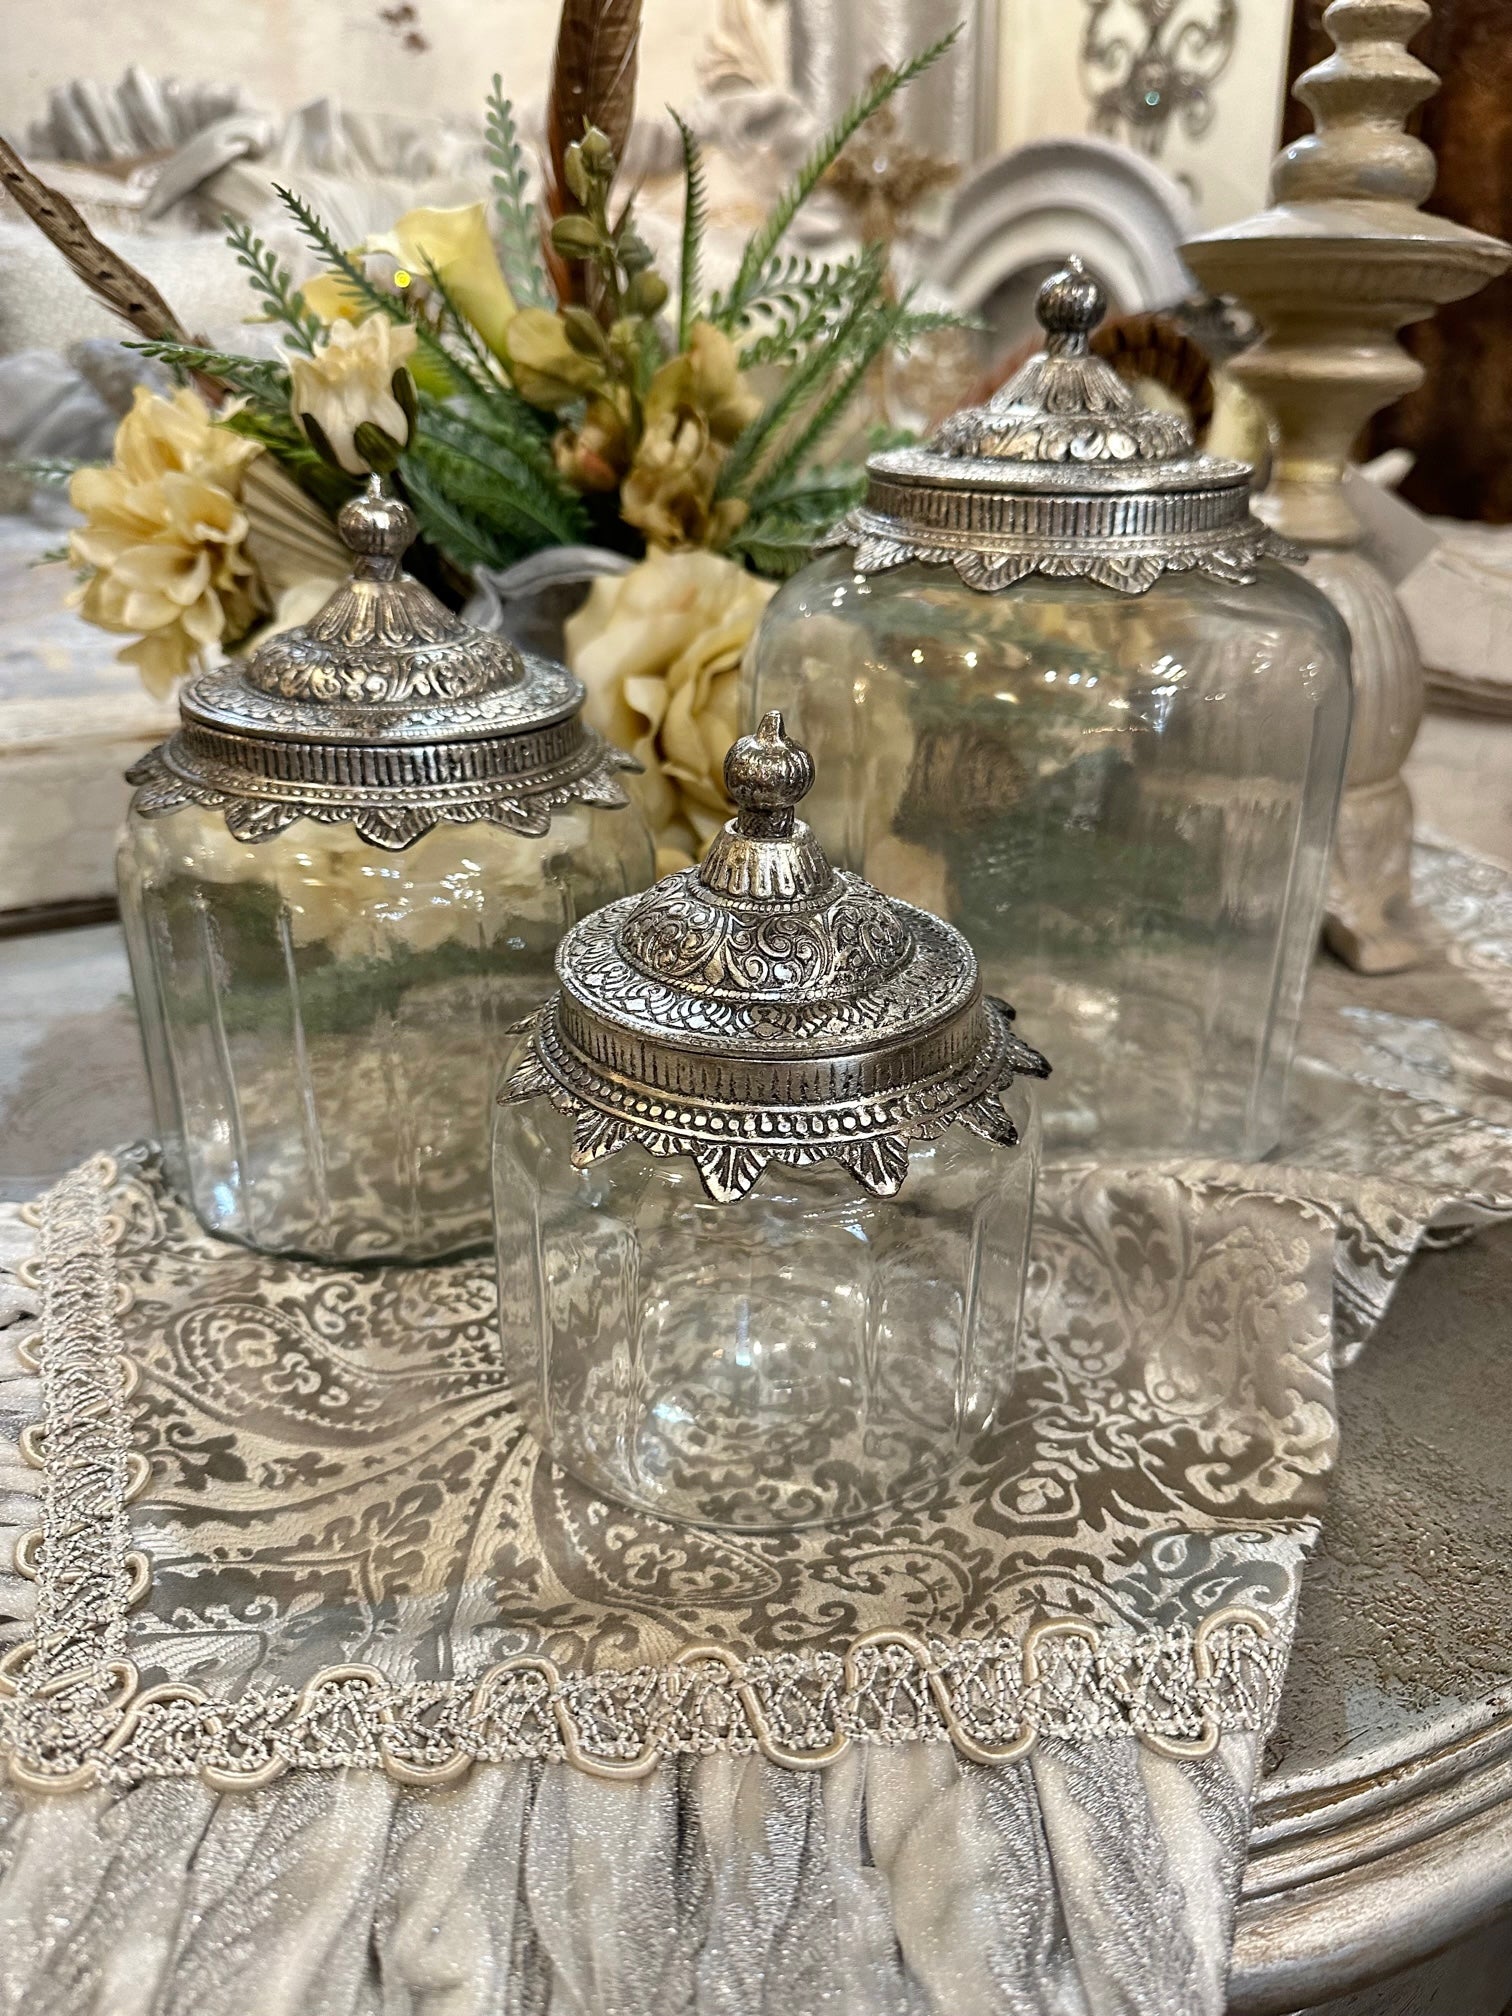 Glass Vanity Canisters with Gold Lids, Mason Jar Bathroom Set (3